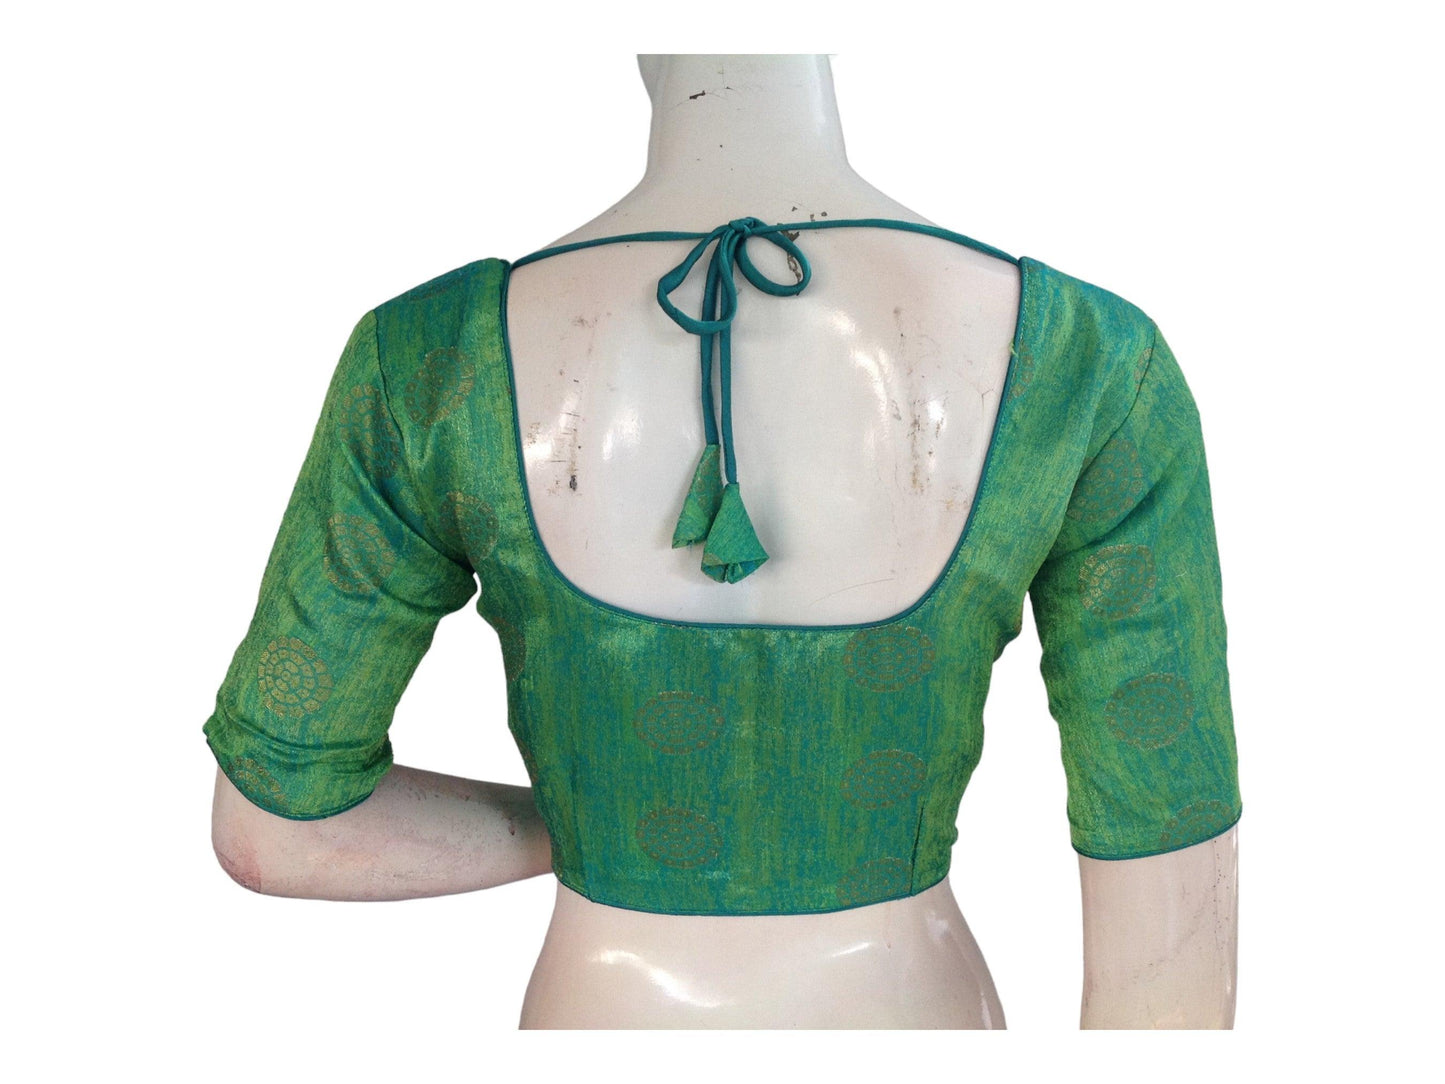 Green Color Brocade Readymade Saree Blouse, Indian Traditional Blouse